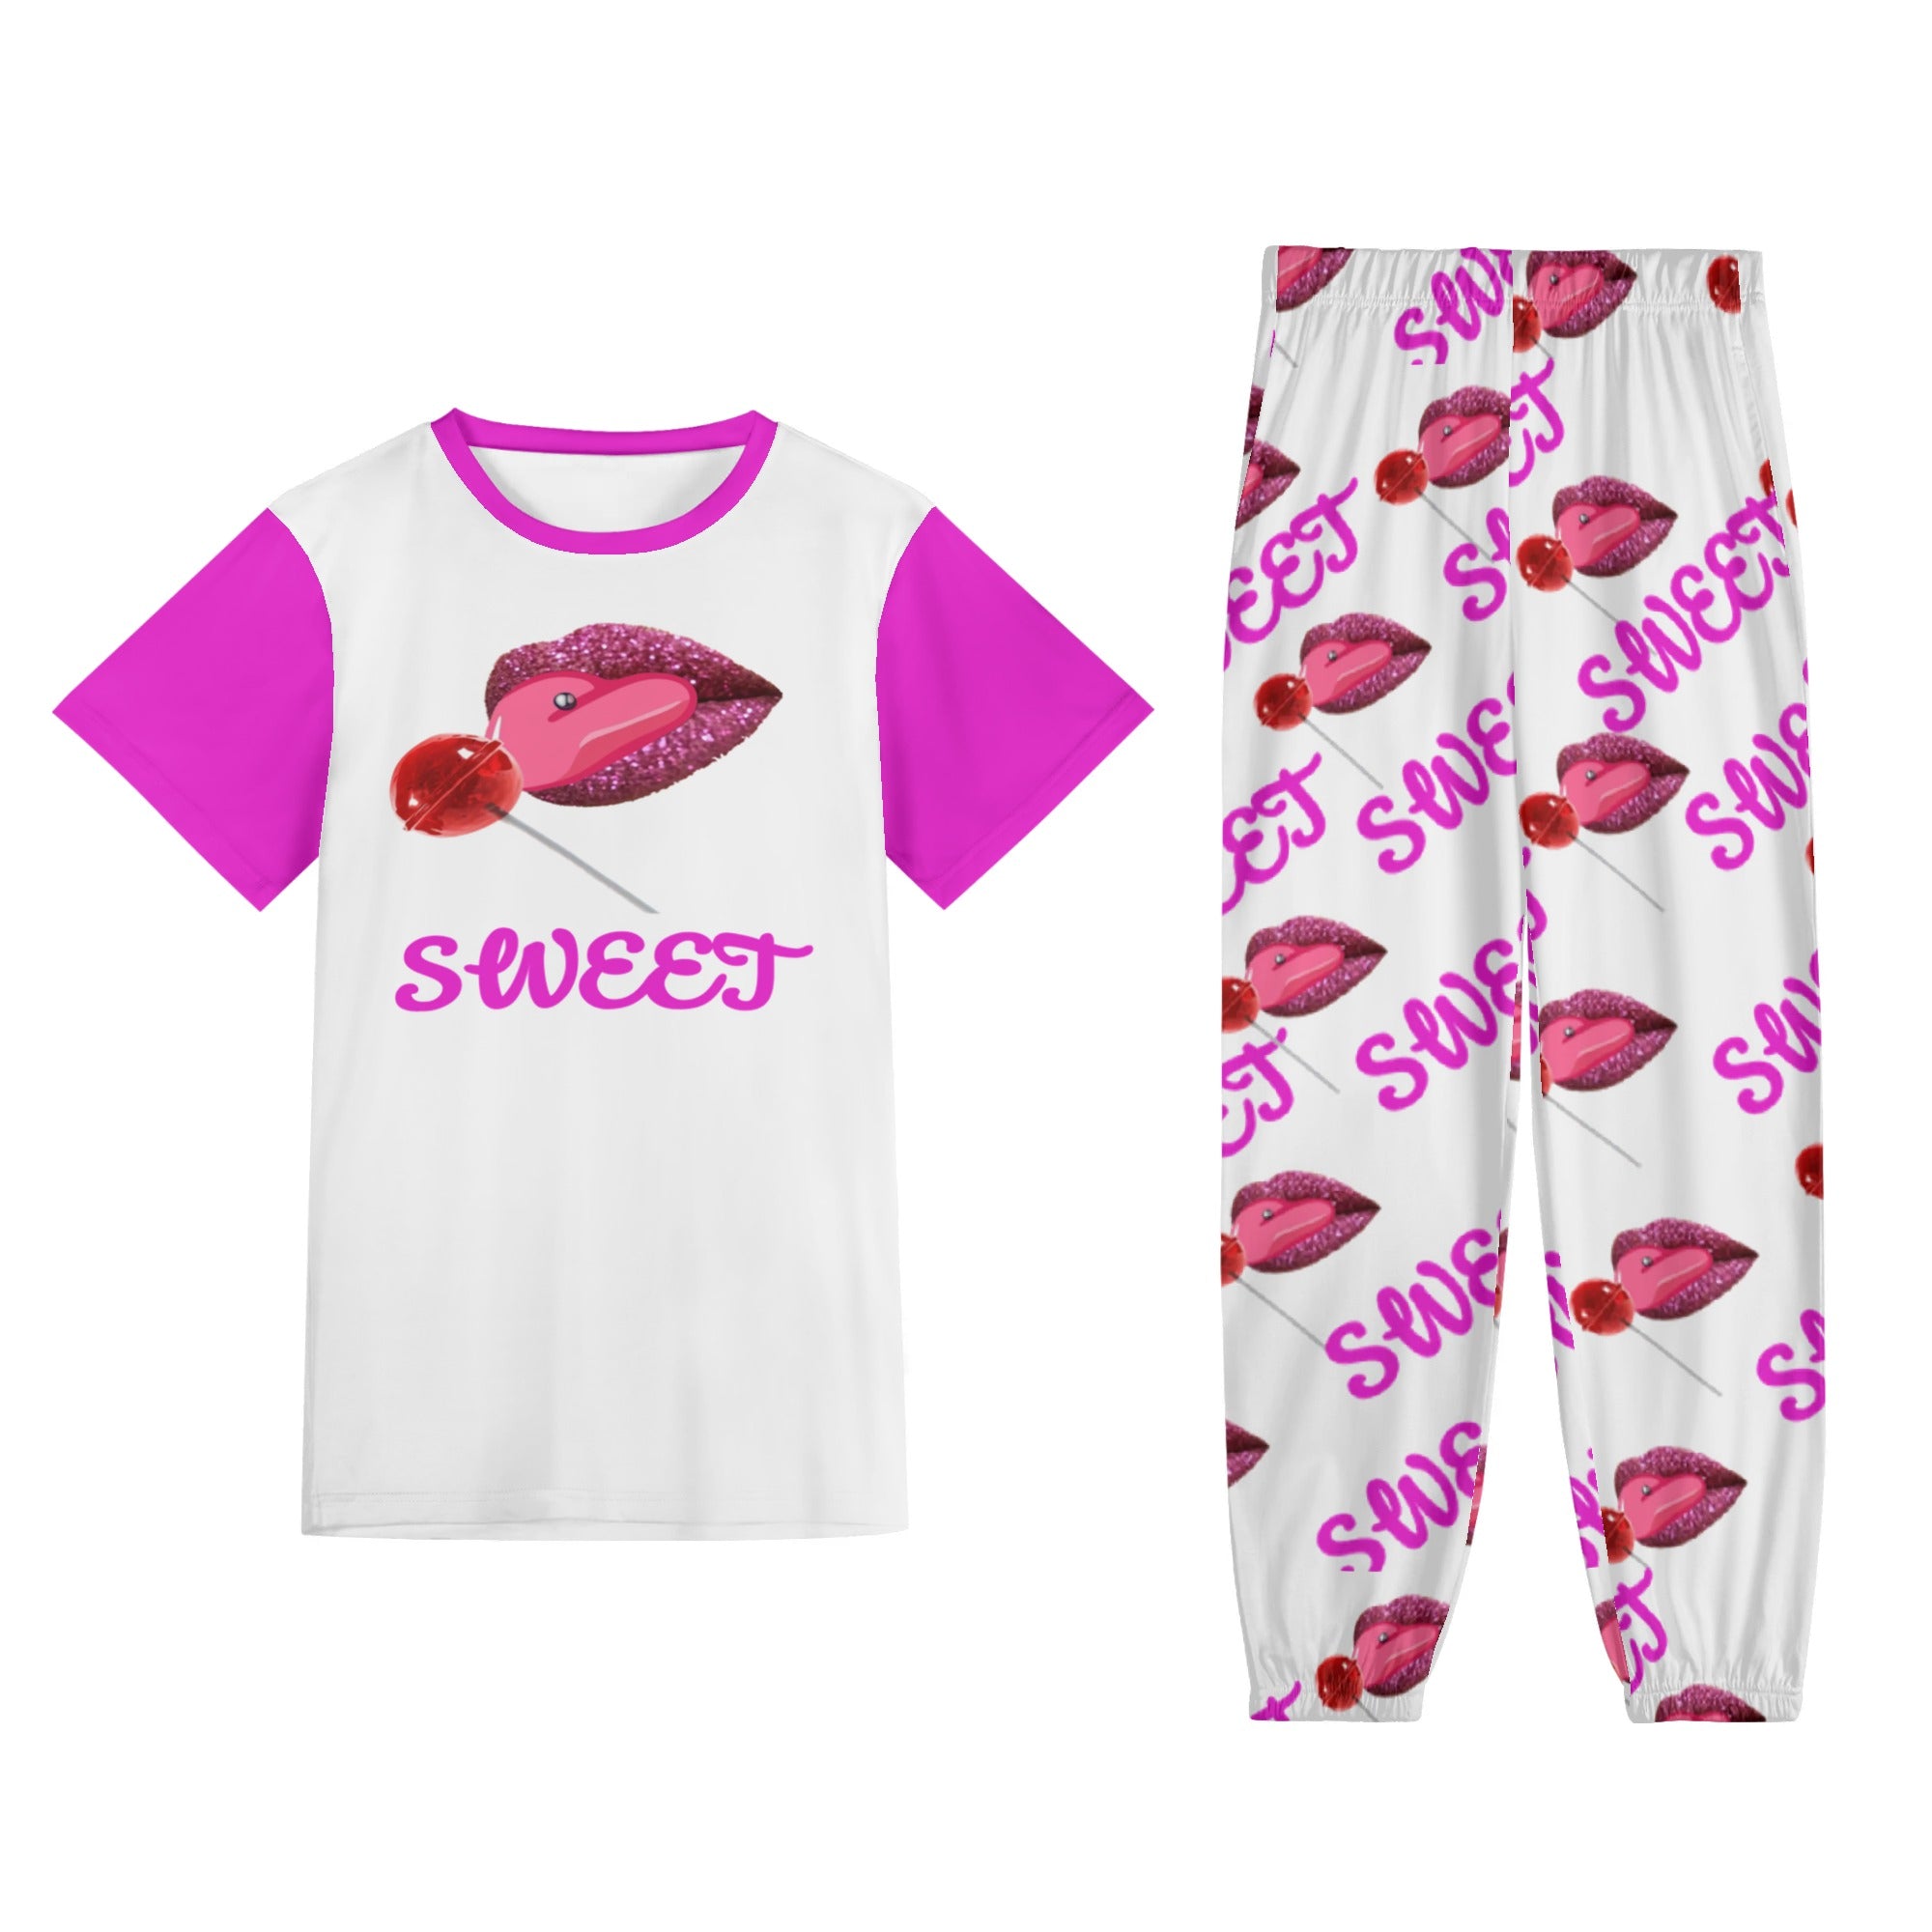 Sweet Clothing Womens Short Sleeve Sports Outfit Set